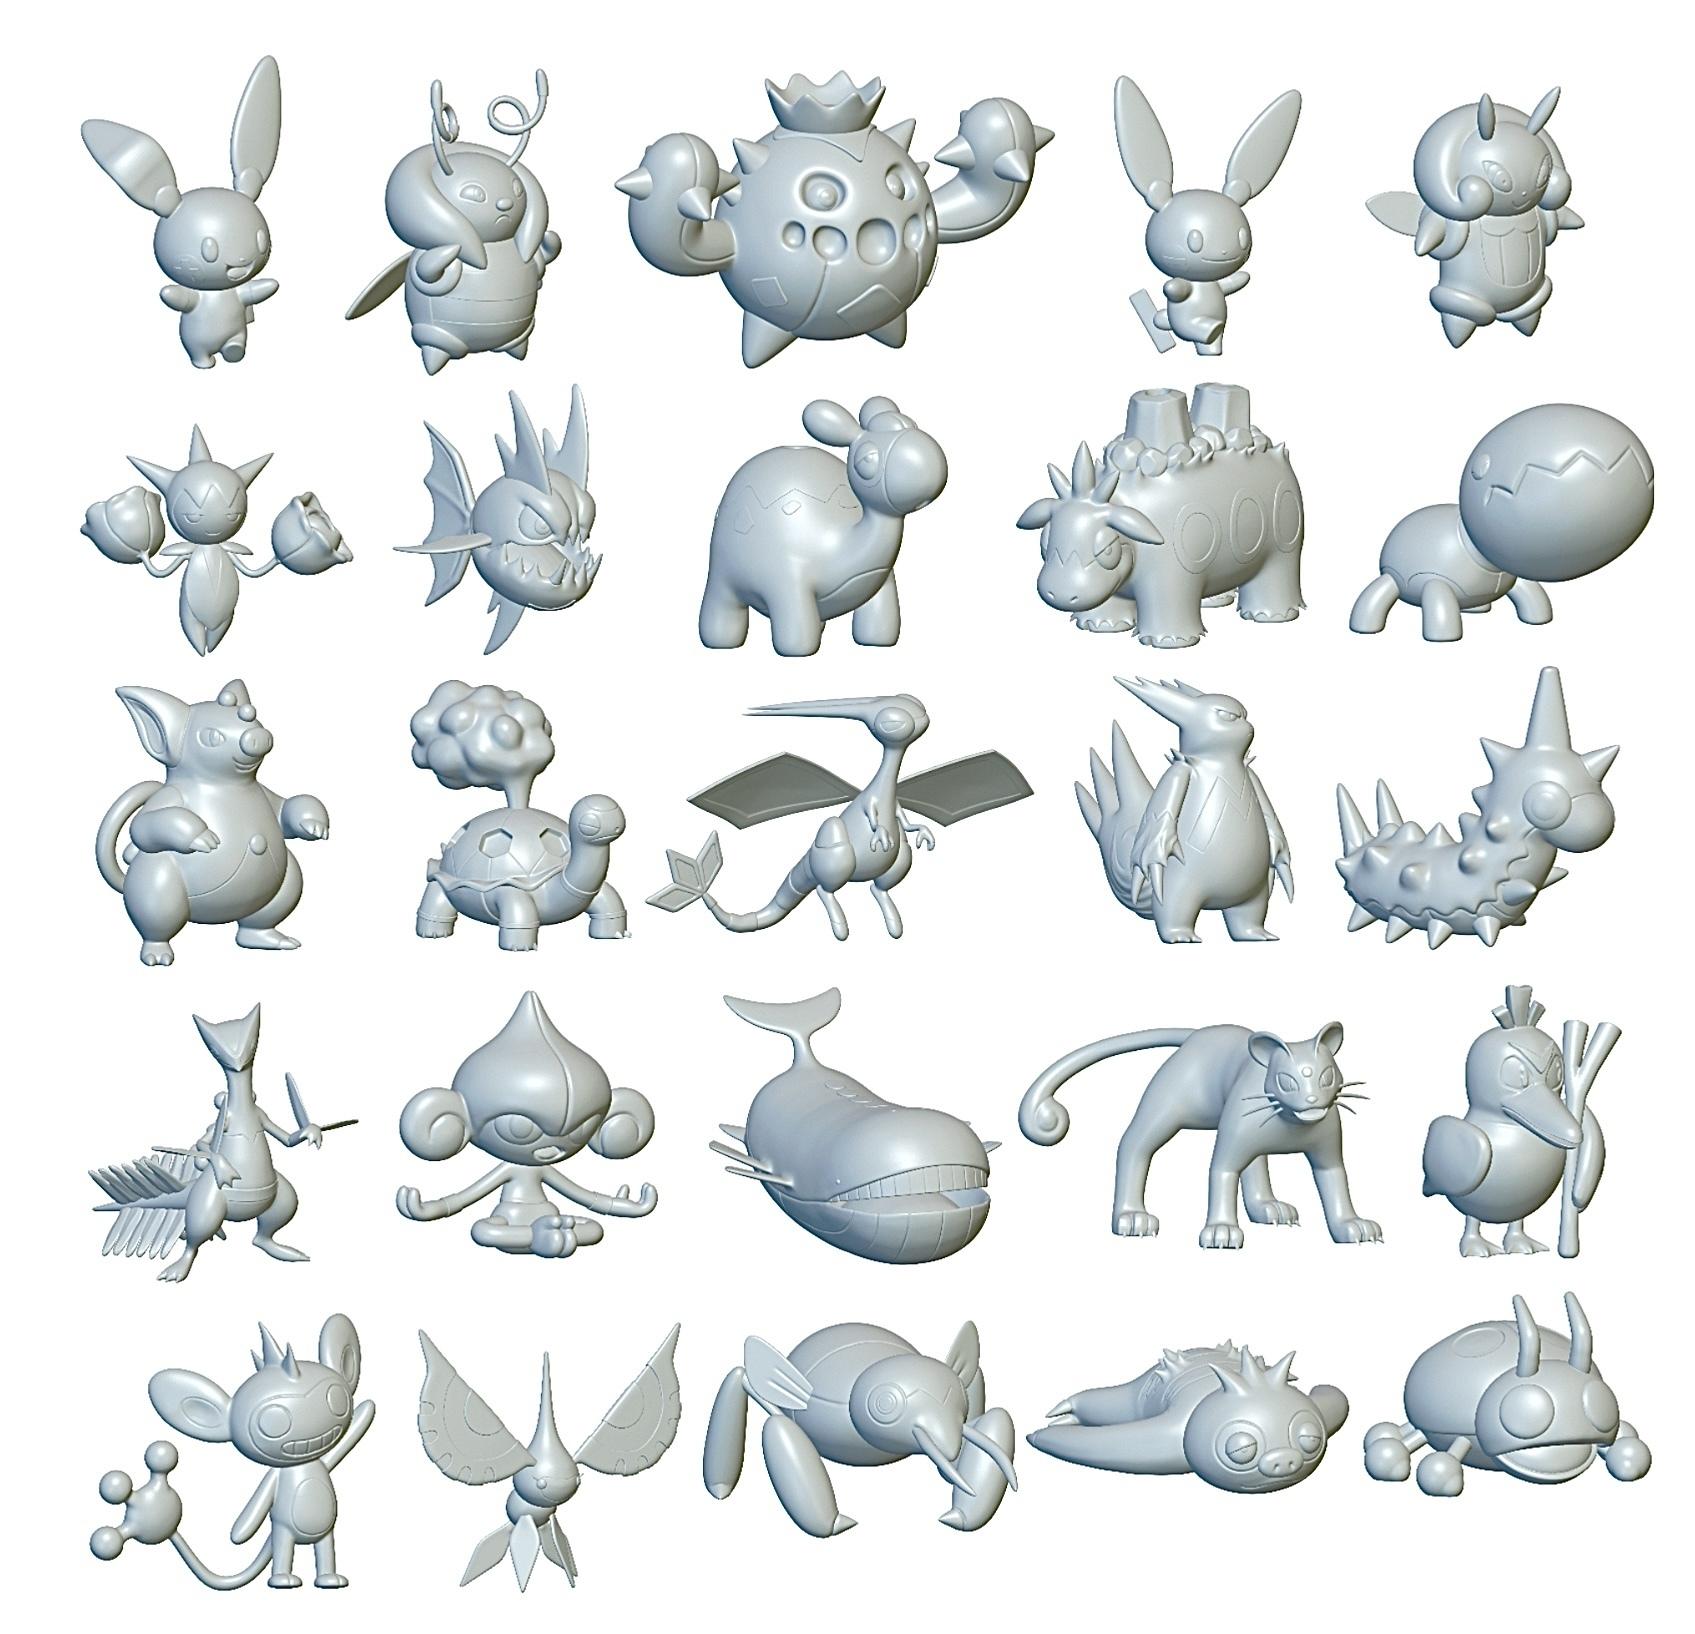 Pokemon Pack Ultra - Optimized for 3D Printing - Updated weekly! (366 so far!) 3d model